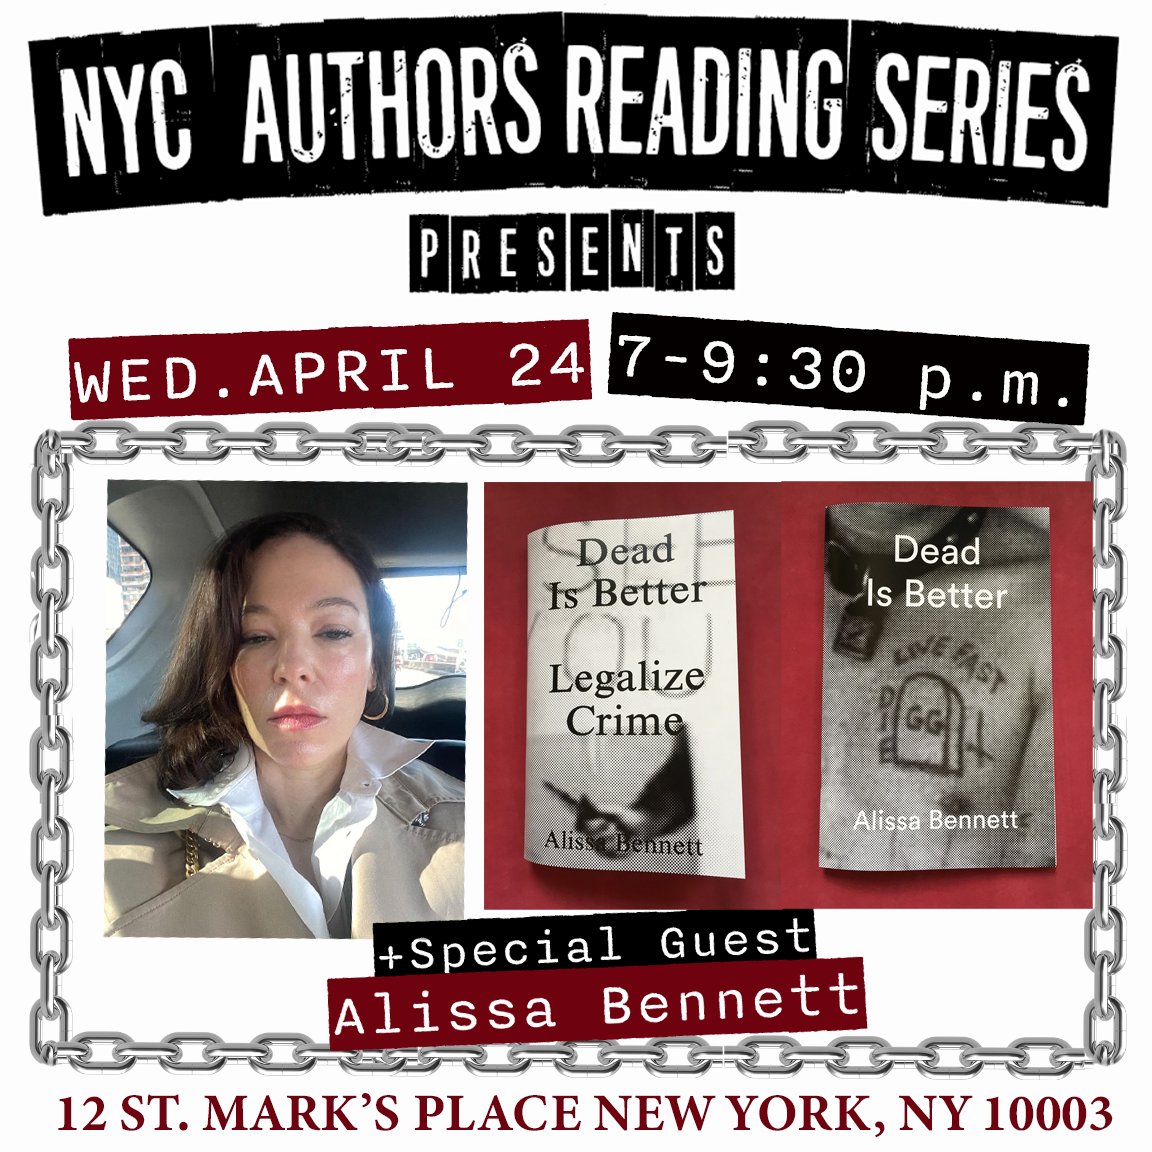 📢Special Guest! Alissa Bennett (writer Dead Is Better/ co-host C-Word podcast w Lena Dunham) joining us on Wednesday 4/24 #VillageWorksnyc Cu there! Reading by: @motelsiren @TheWinsomeBrown Meg Yates & #AlissaBennett Hosted by: @mikedolanny #NYC #writers @TheCleggAgency